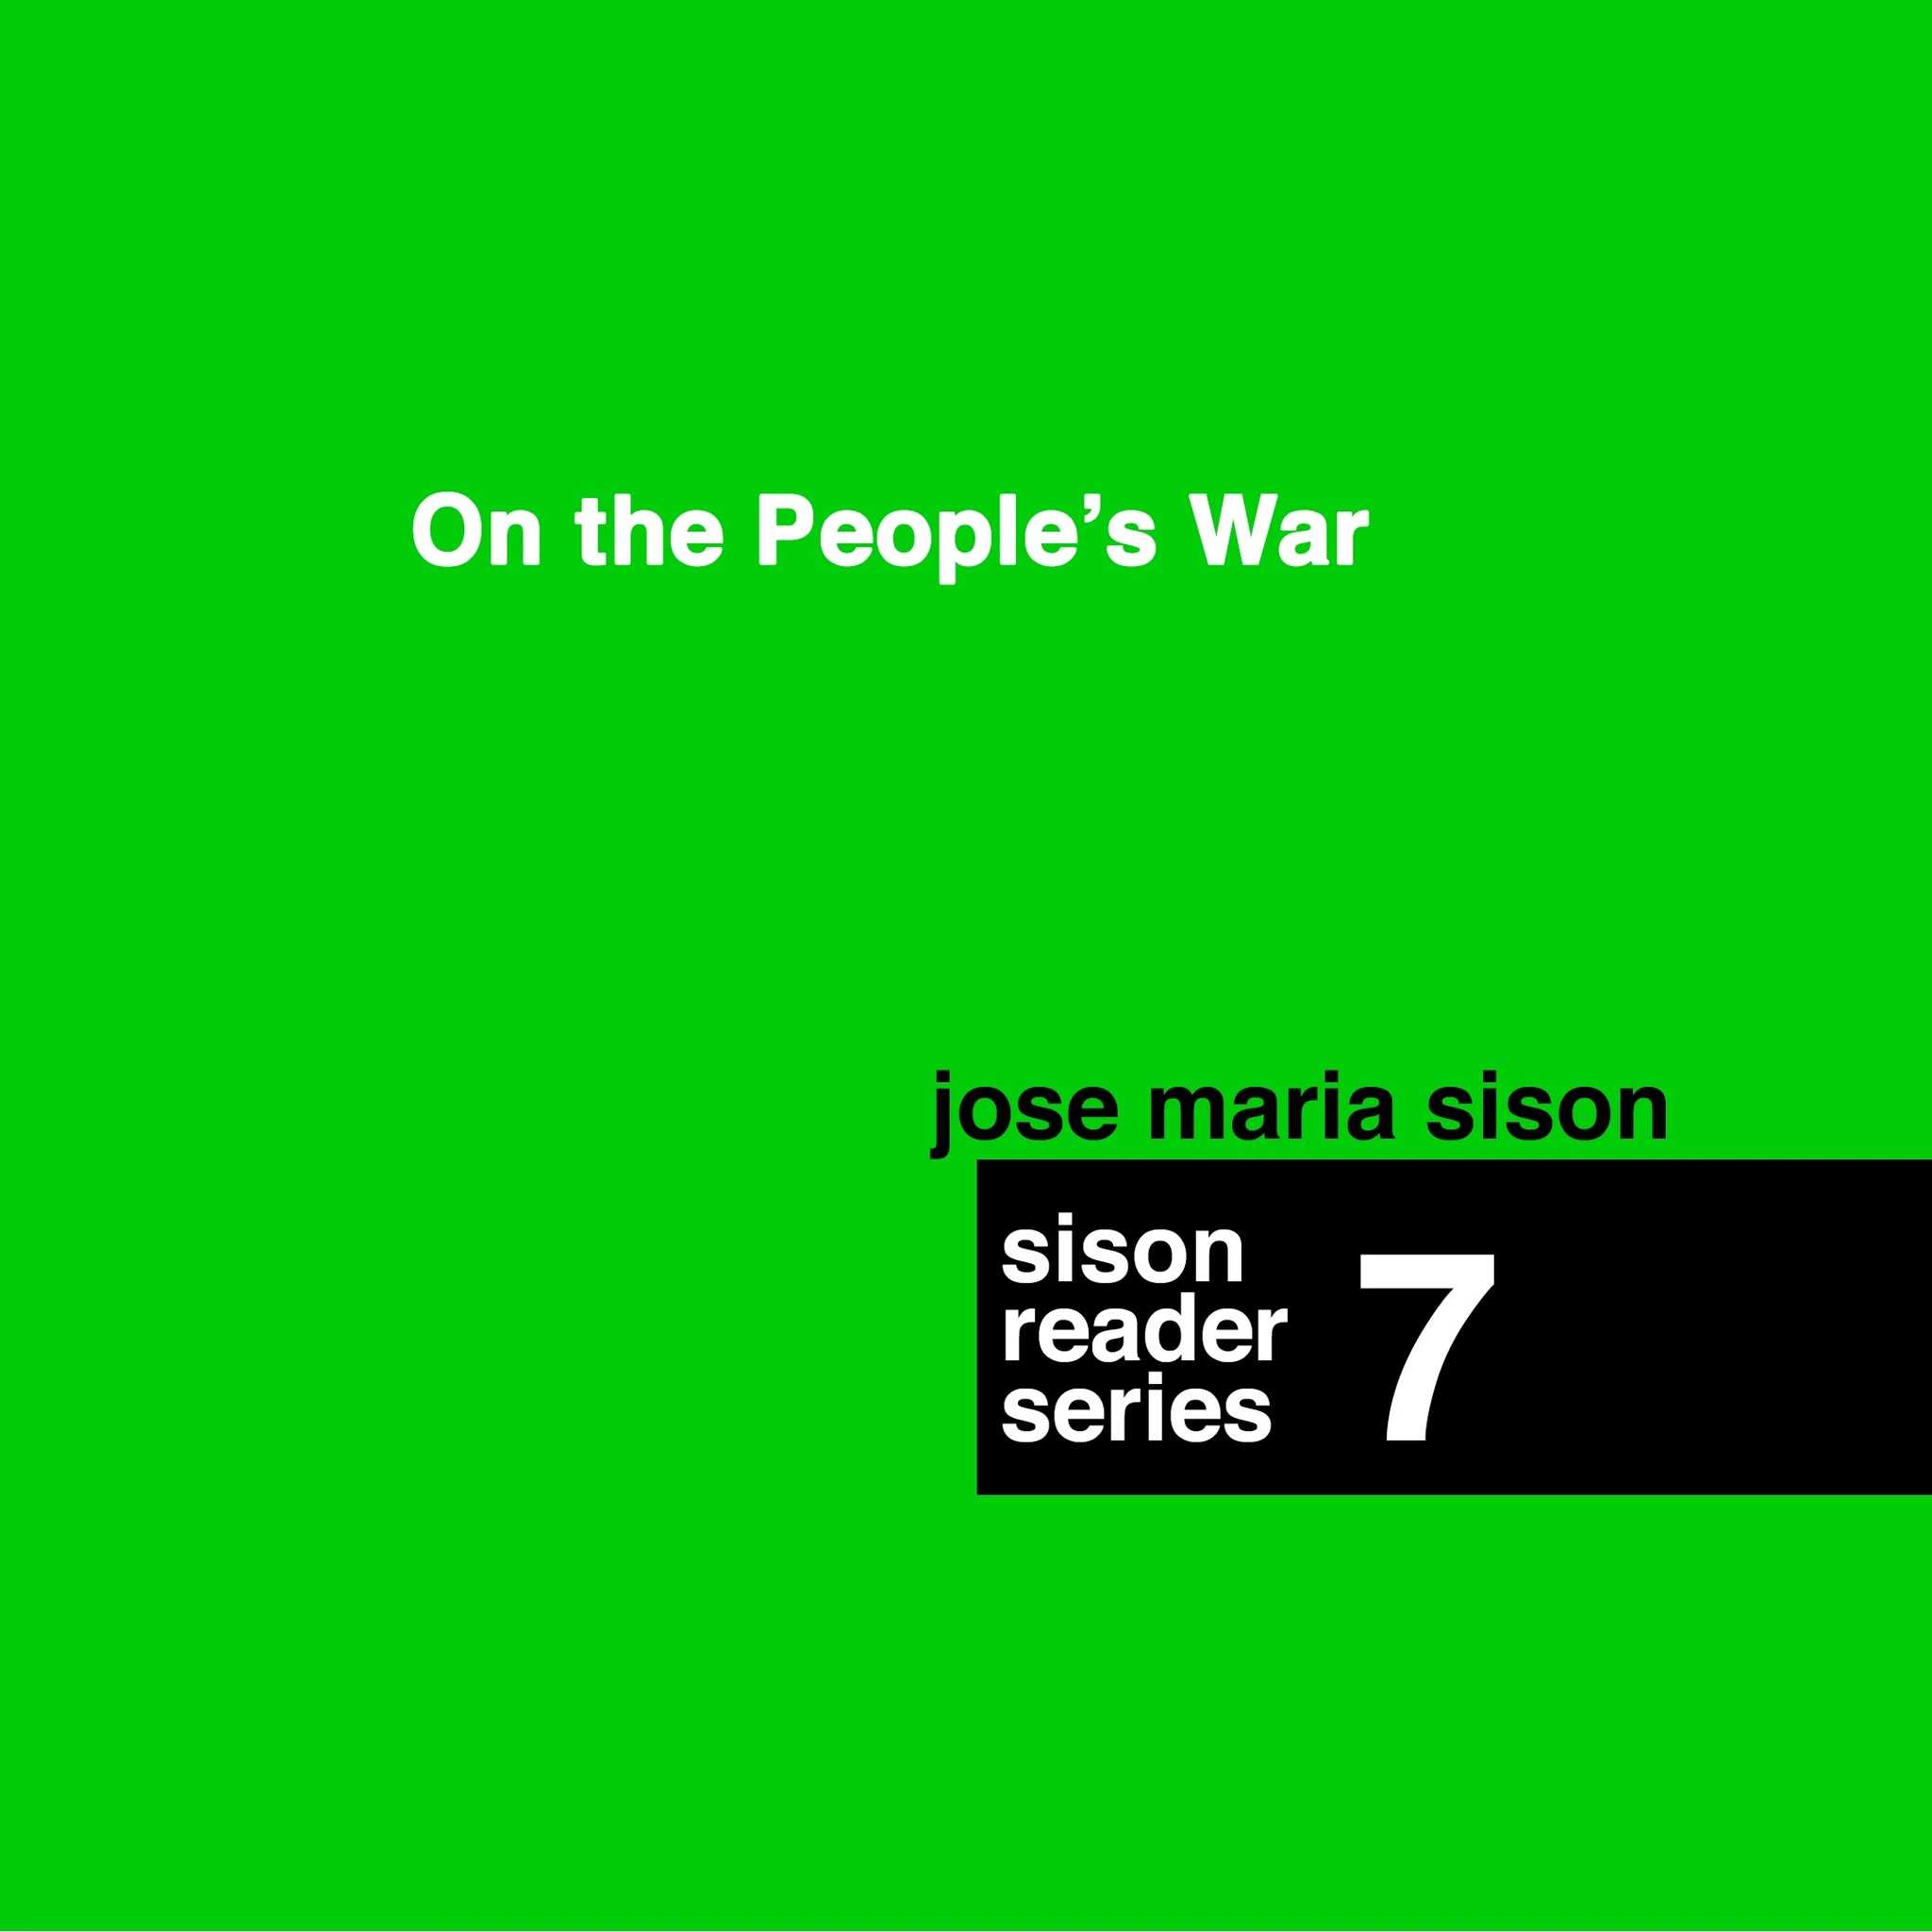 No. 7 - On People's War